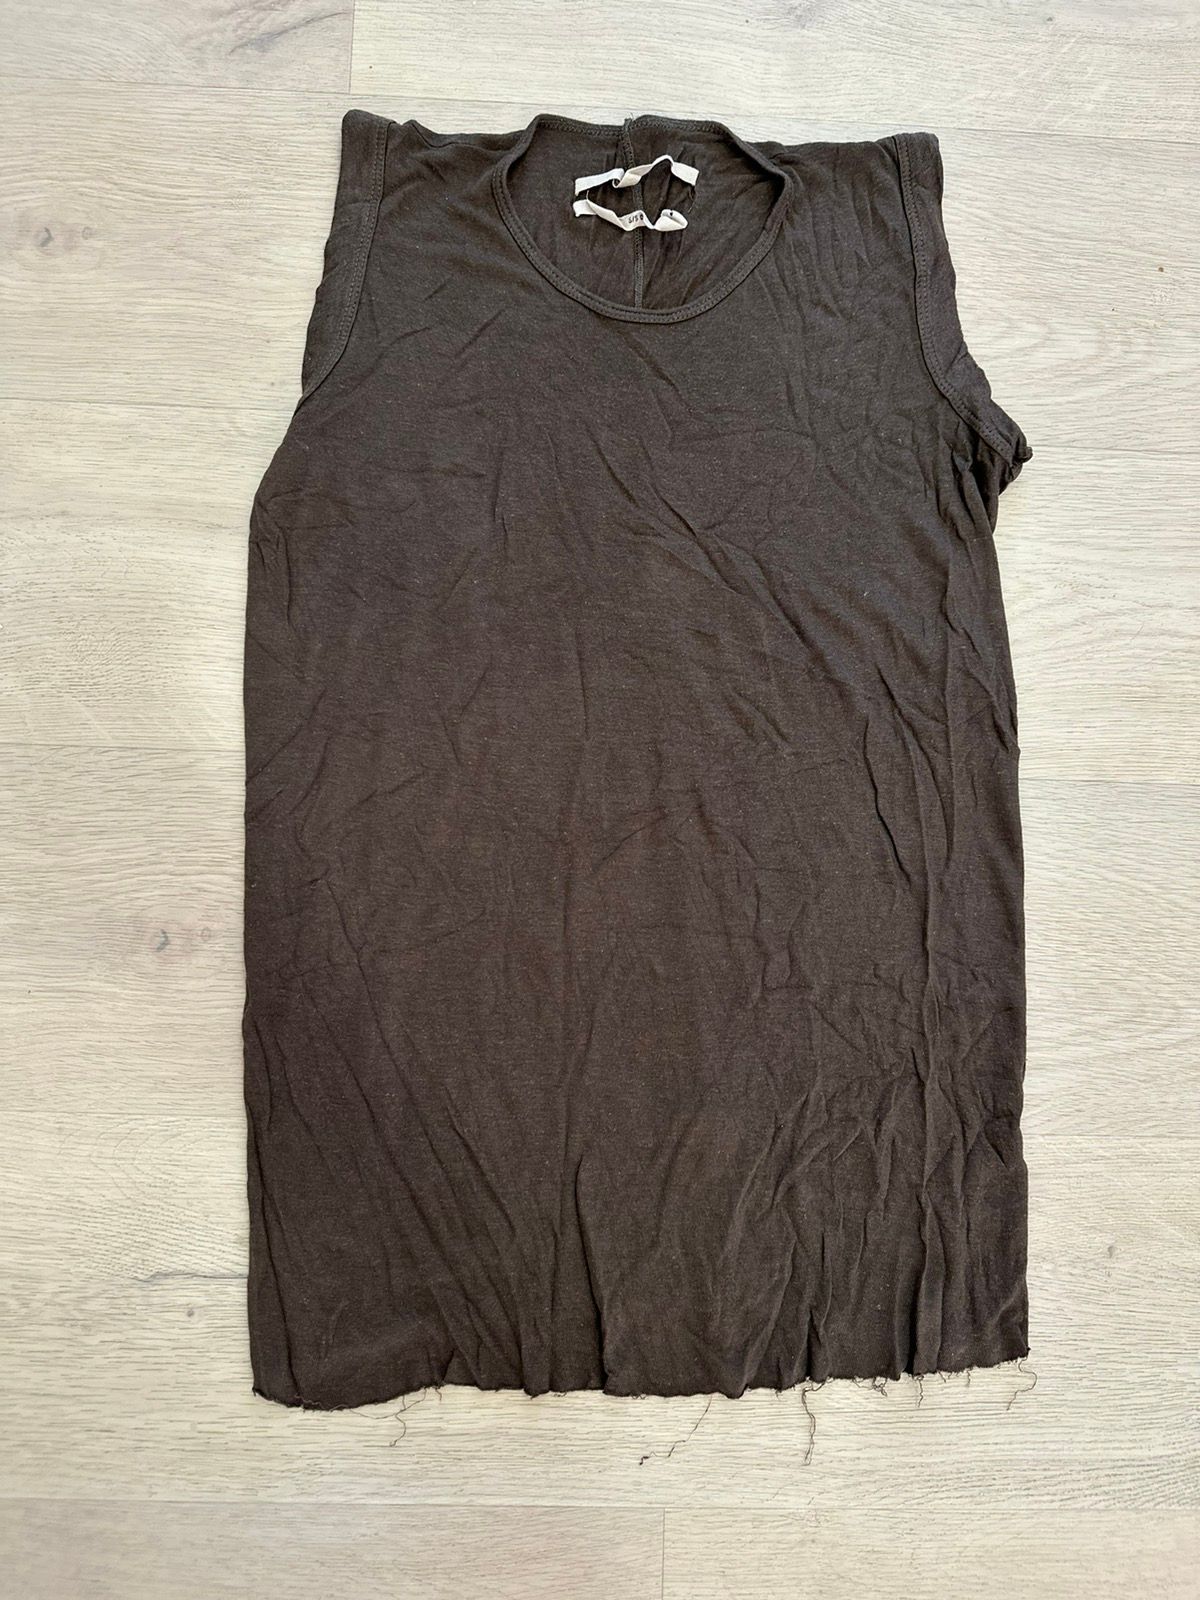 Pre-owned Rick Owens Ss 2002 Vapor Tank In Brown